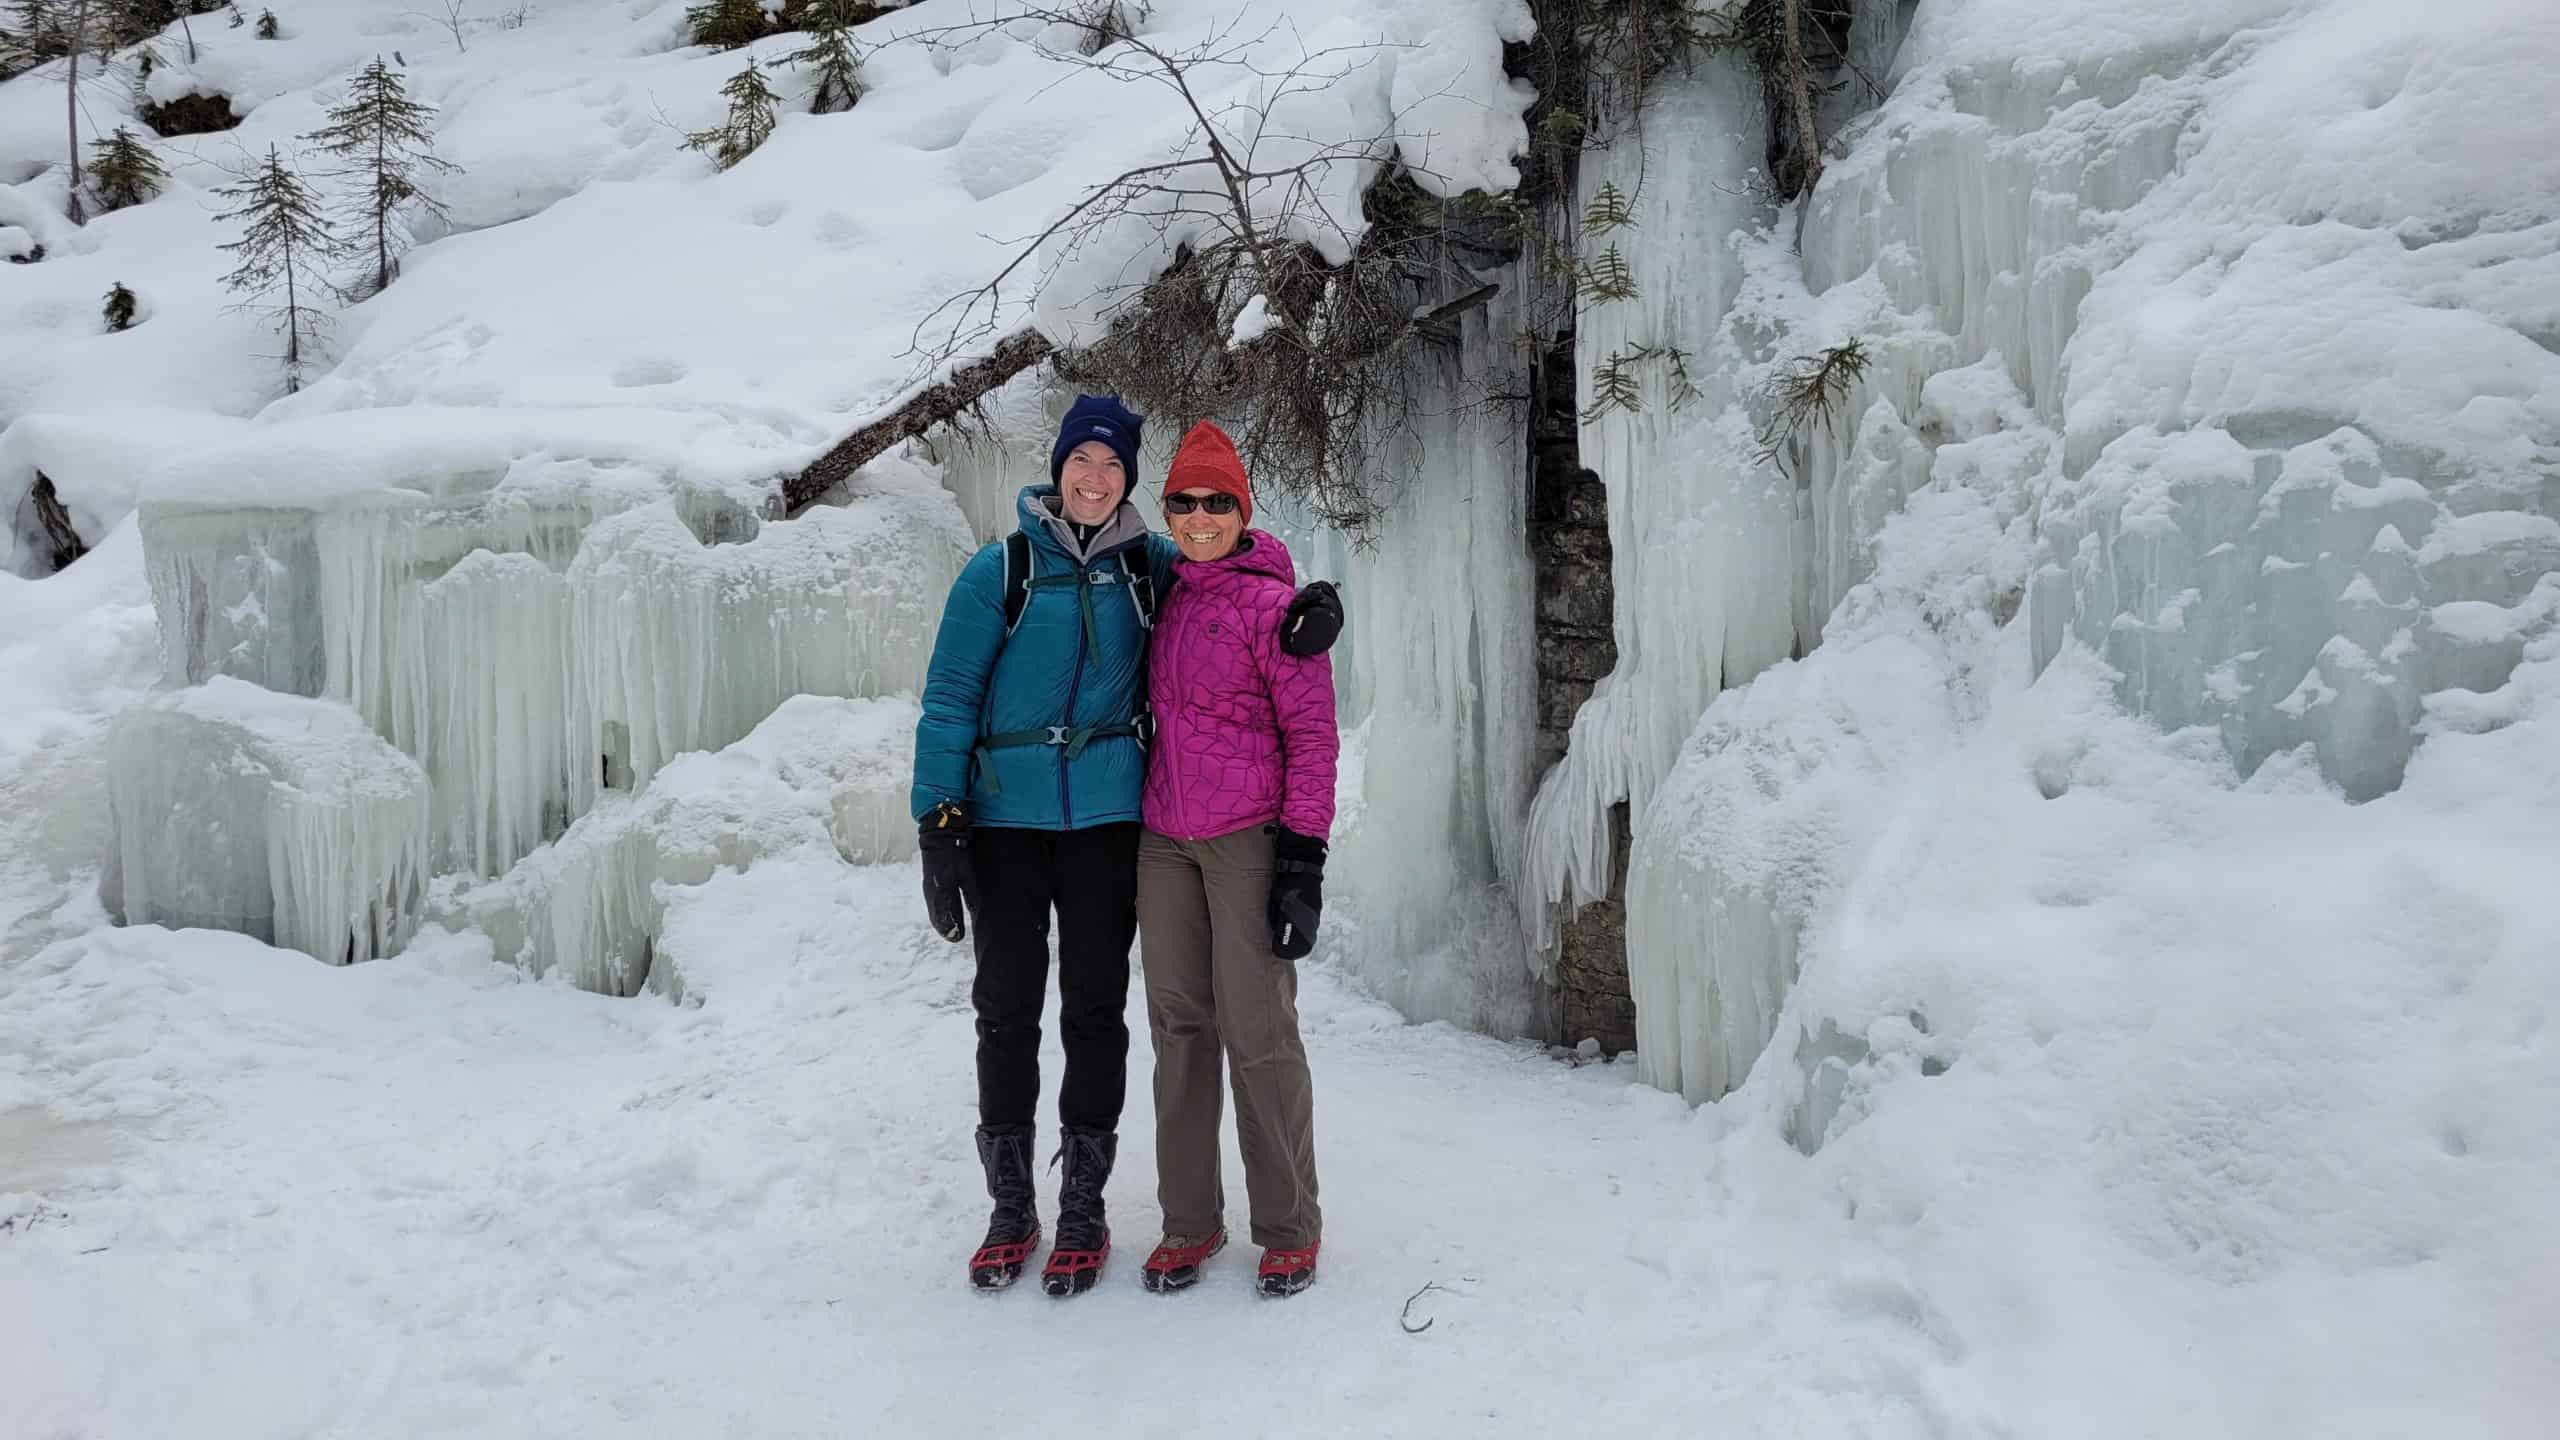 Our testers standing in front of the iced over waterfall while wearing the Kahtoola Microspikes.